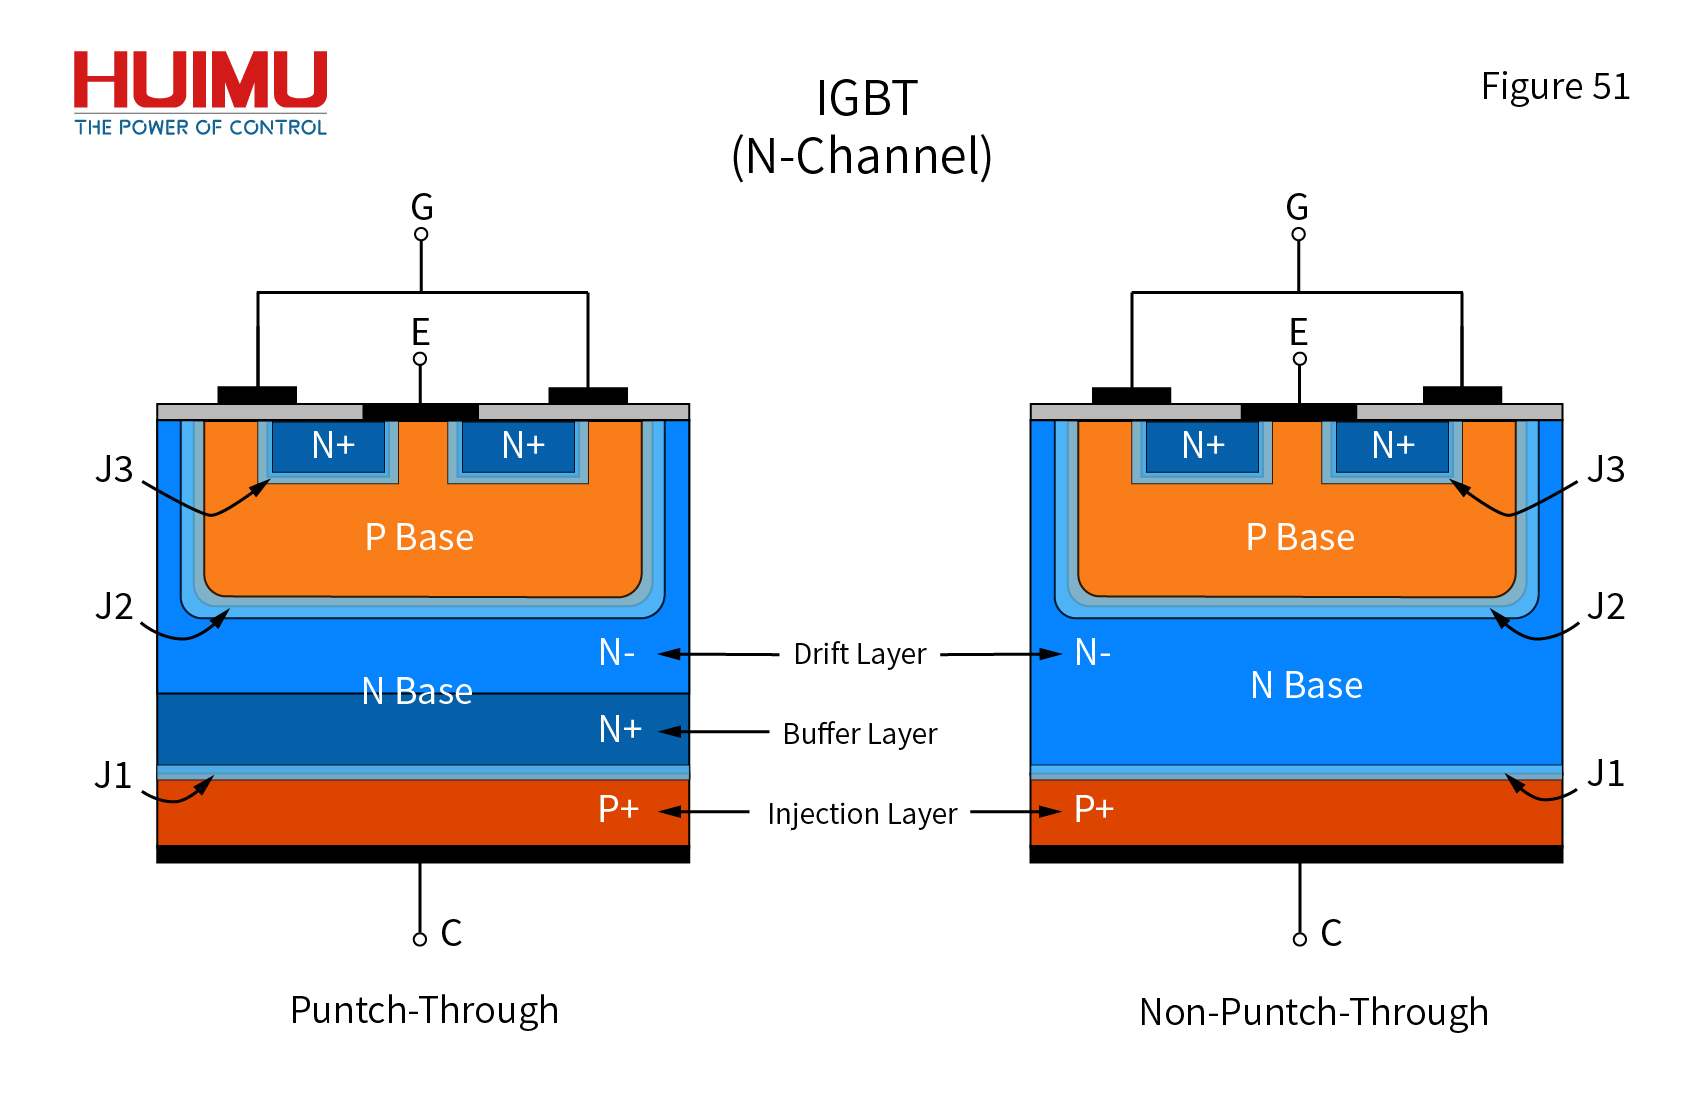 Basic Structure of IGBT